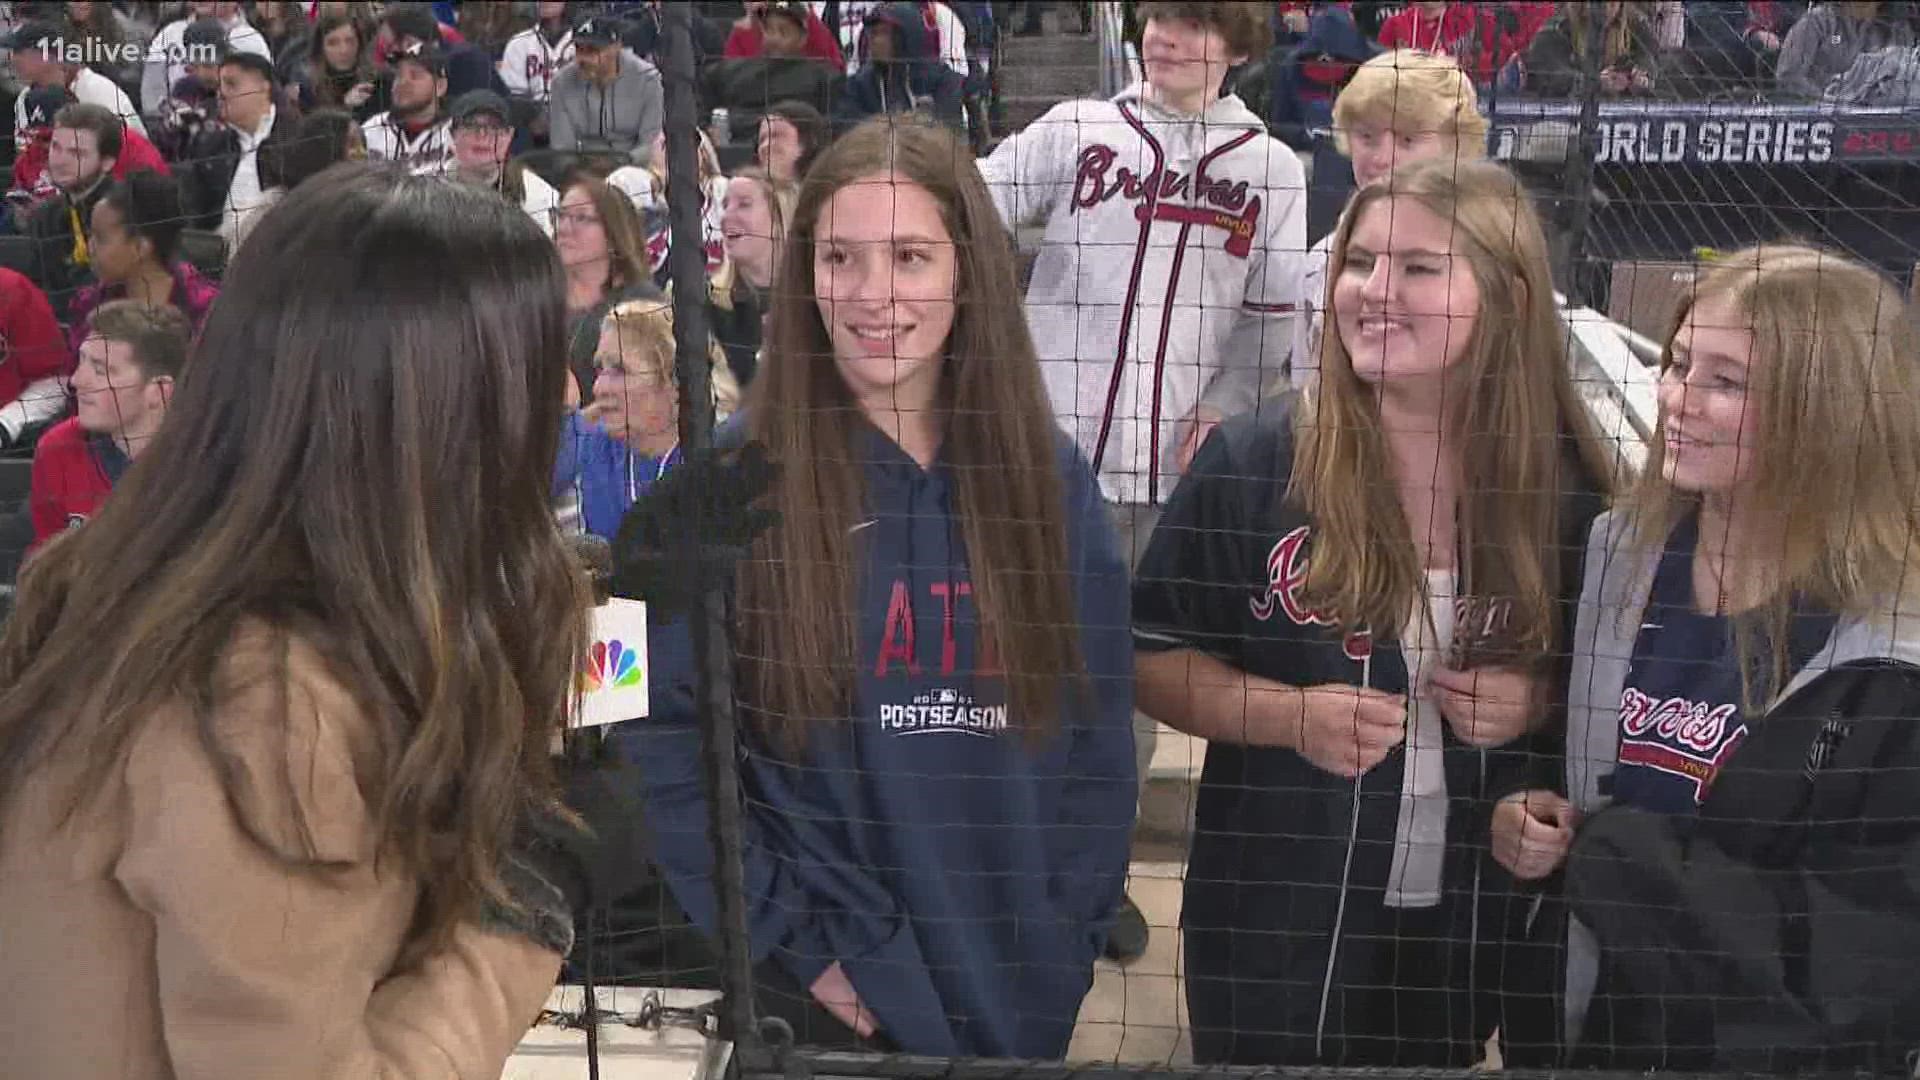 In the 5th inning, the Atlanta Braves were up 6-0 in the World Series. Hear from these young fans watching live at Truist Park.